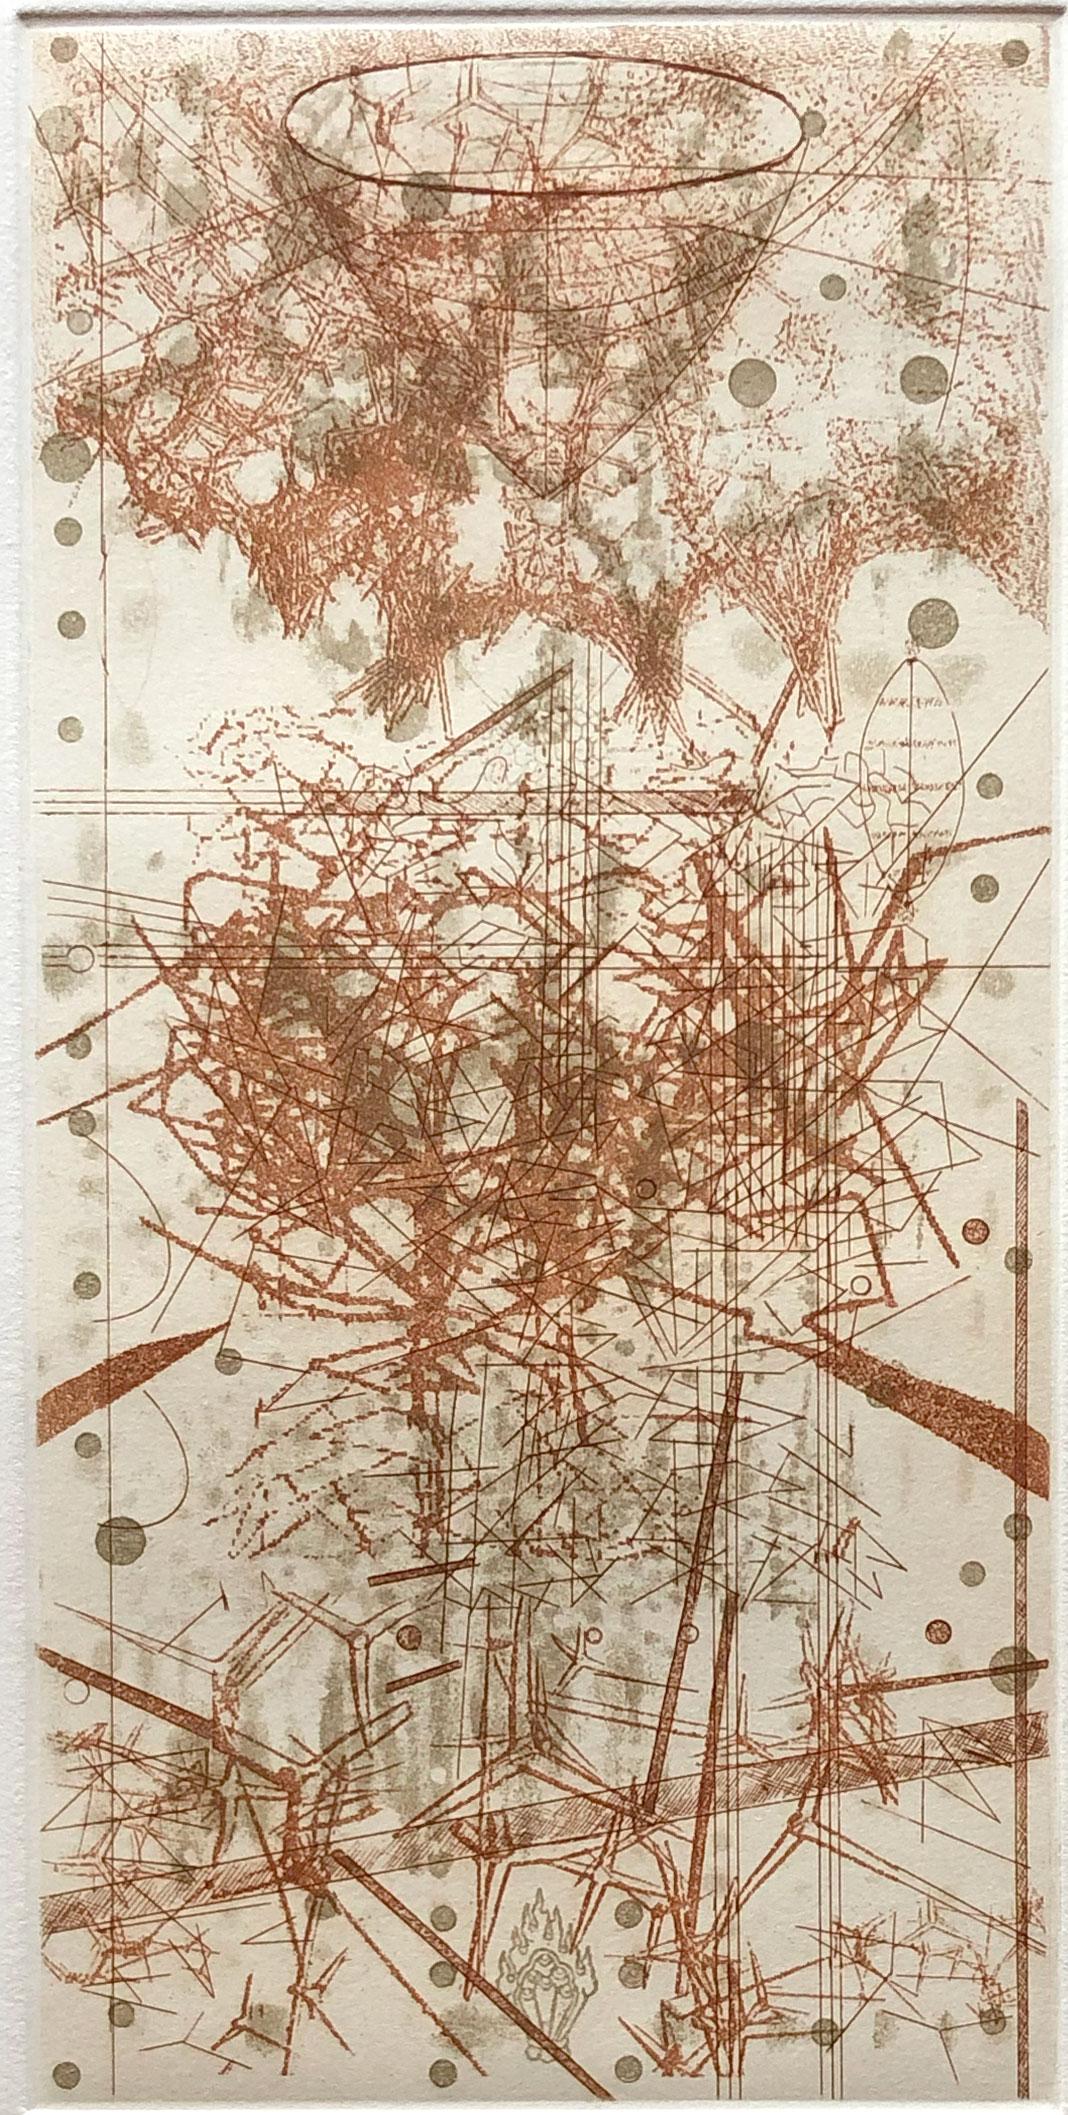 Medium: Etching with aquatint
Image: 11.88 x 5.88 inches
Edition of 15
Year: 2013

Images from particle physics, satellite photography, biotechnology, radiology, and geological survey maps, have all served as influences on Richards' work. She uses